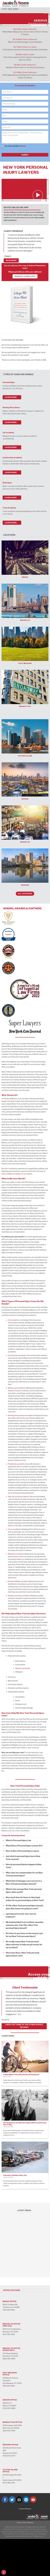 Jacoby & Meyers, LLP - New York NY Lawyers